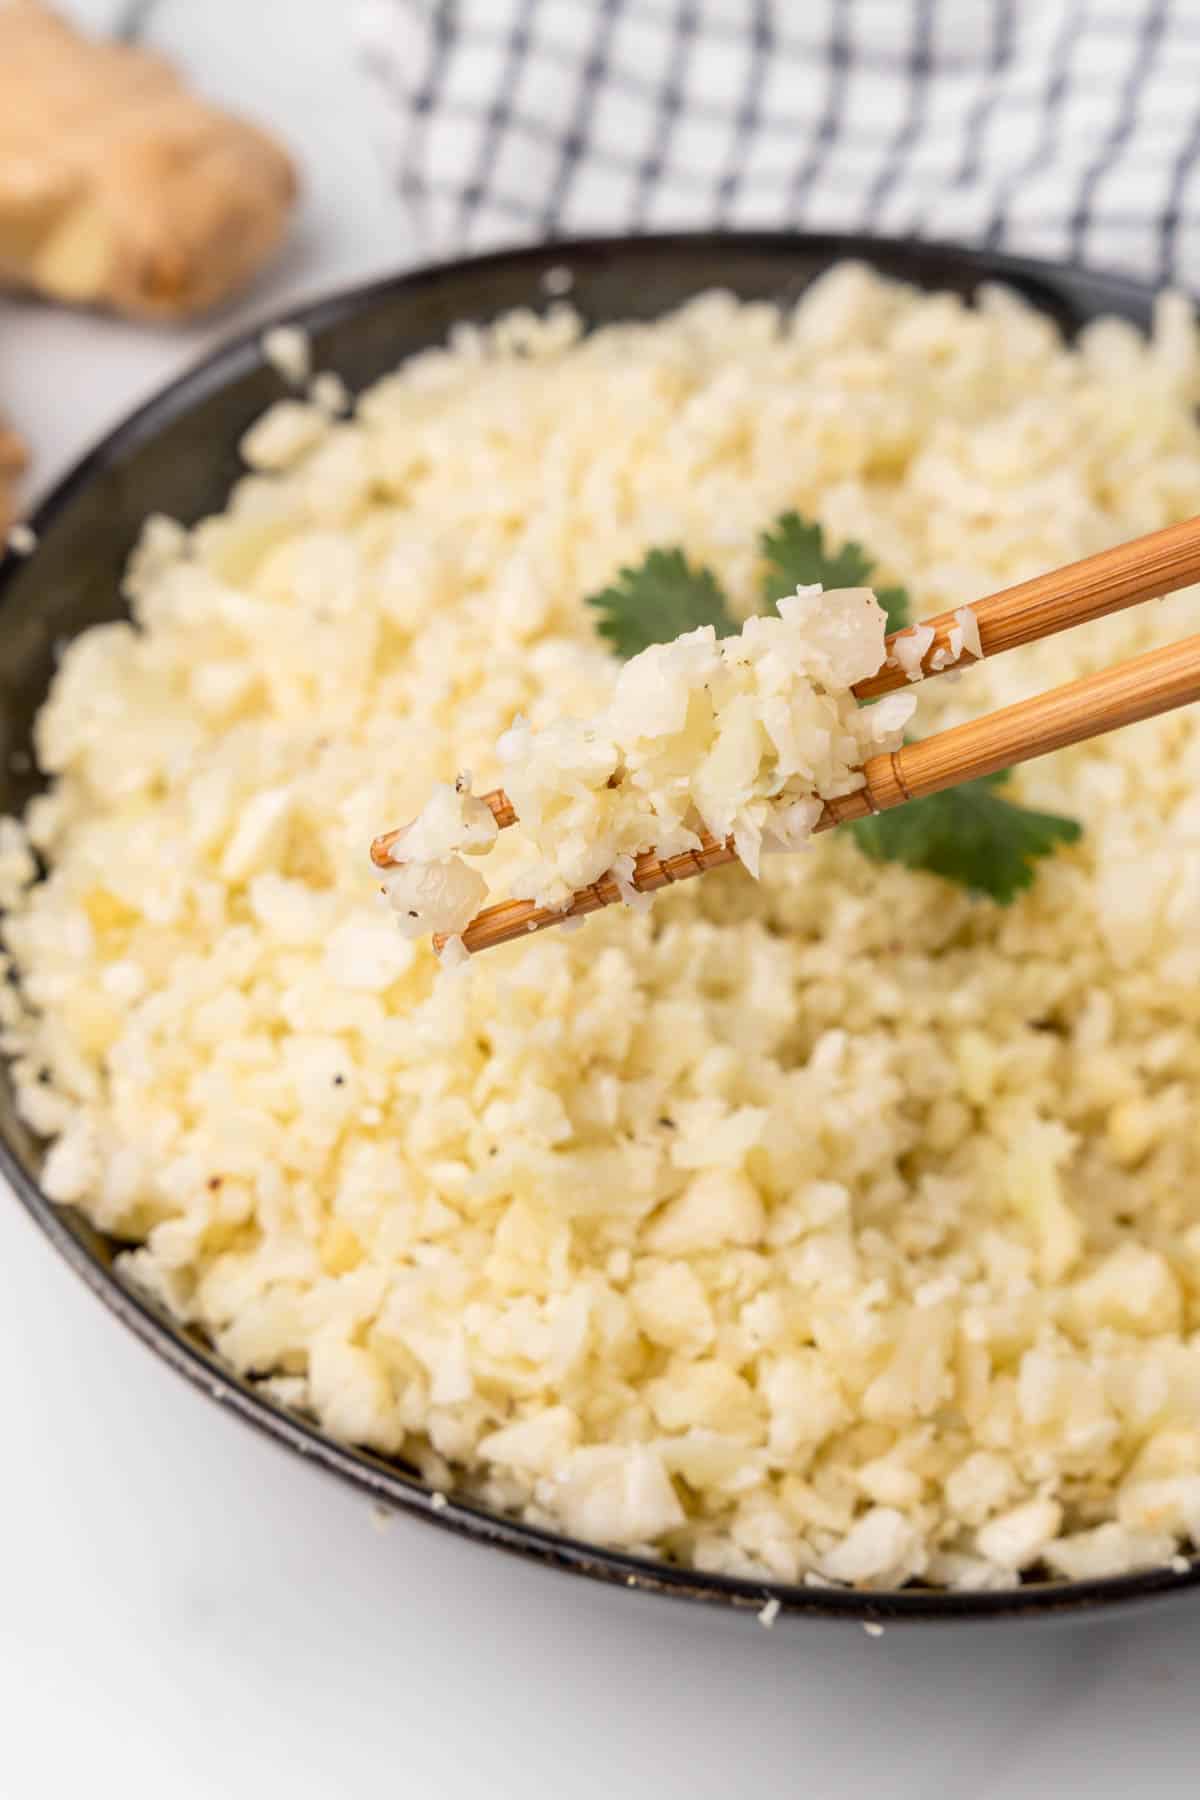 Pair of chopsticks lifting rice from a bowl